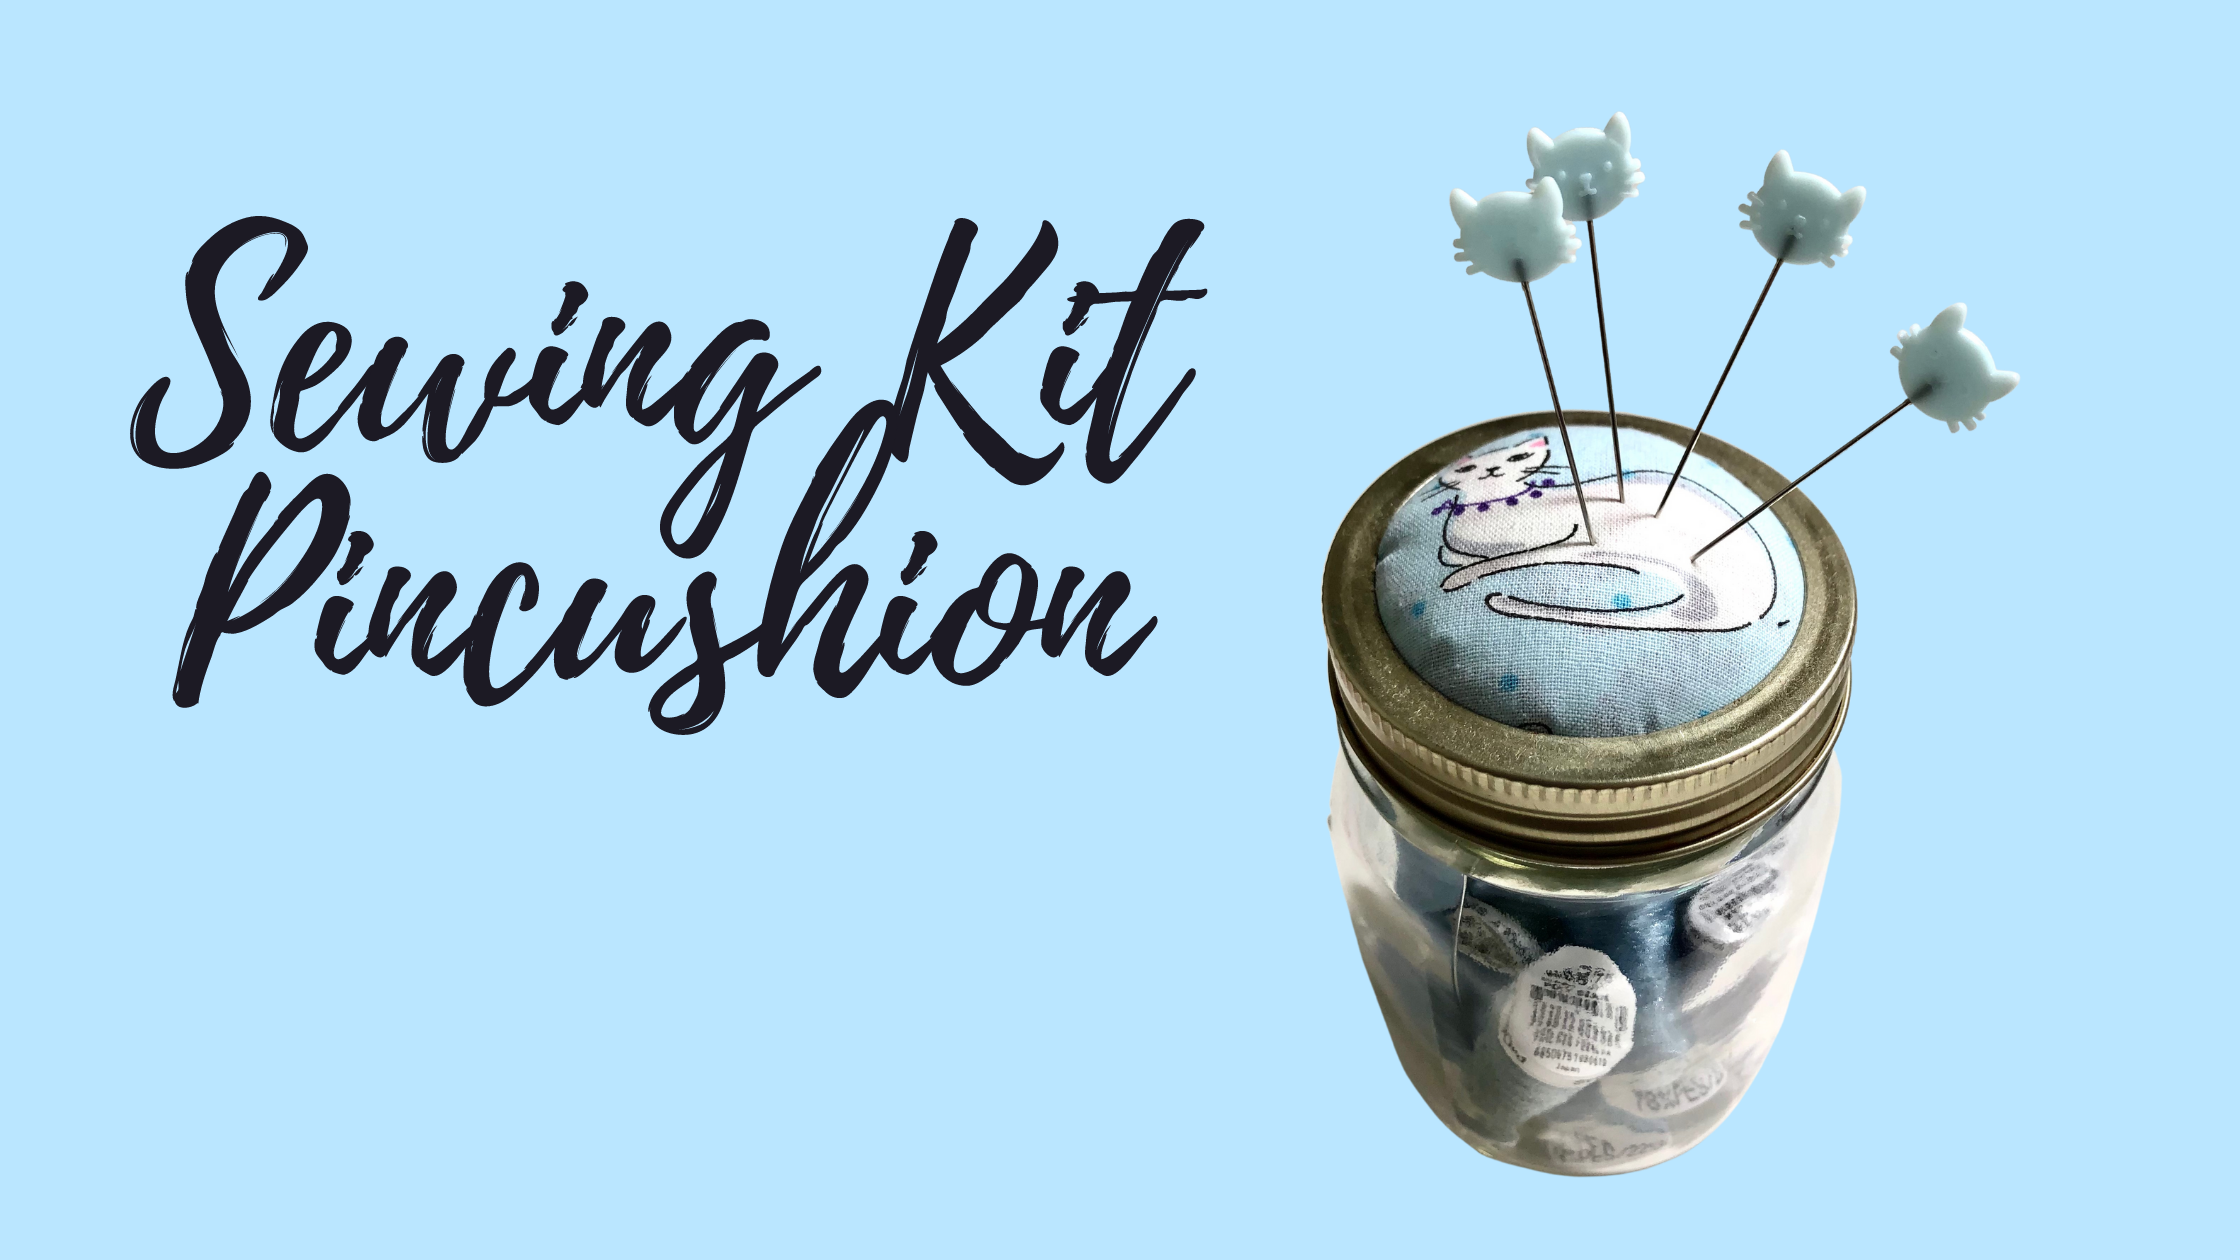 Cotton and Steel Mini Sewing Kit. Handmade. Travel Sewing Kit